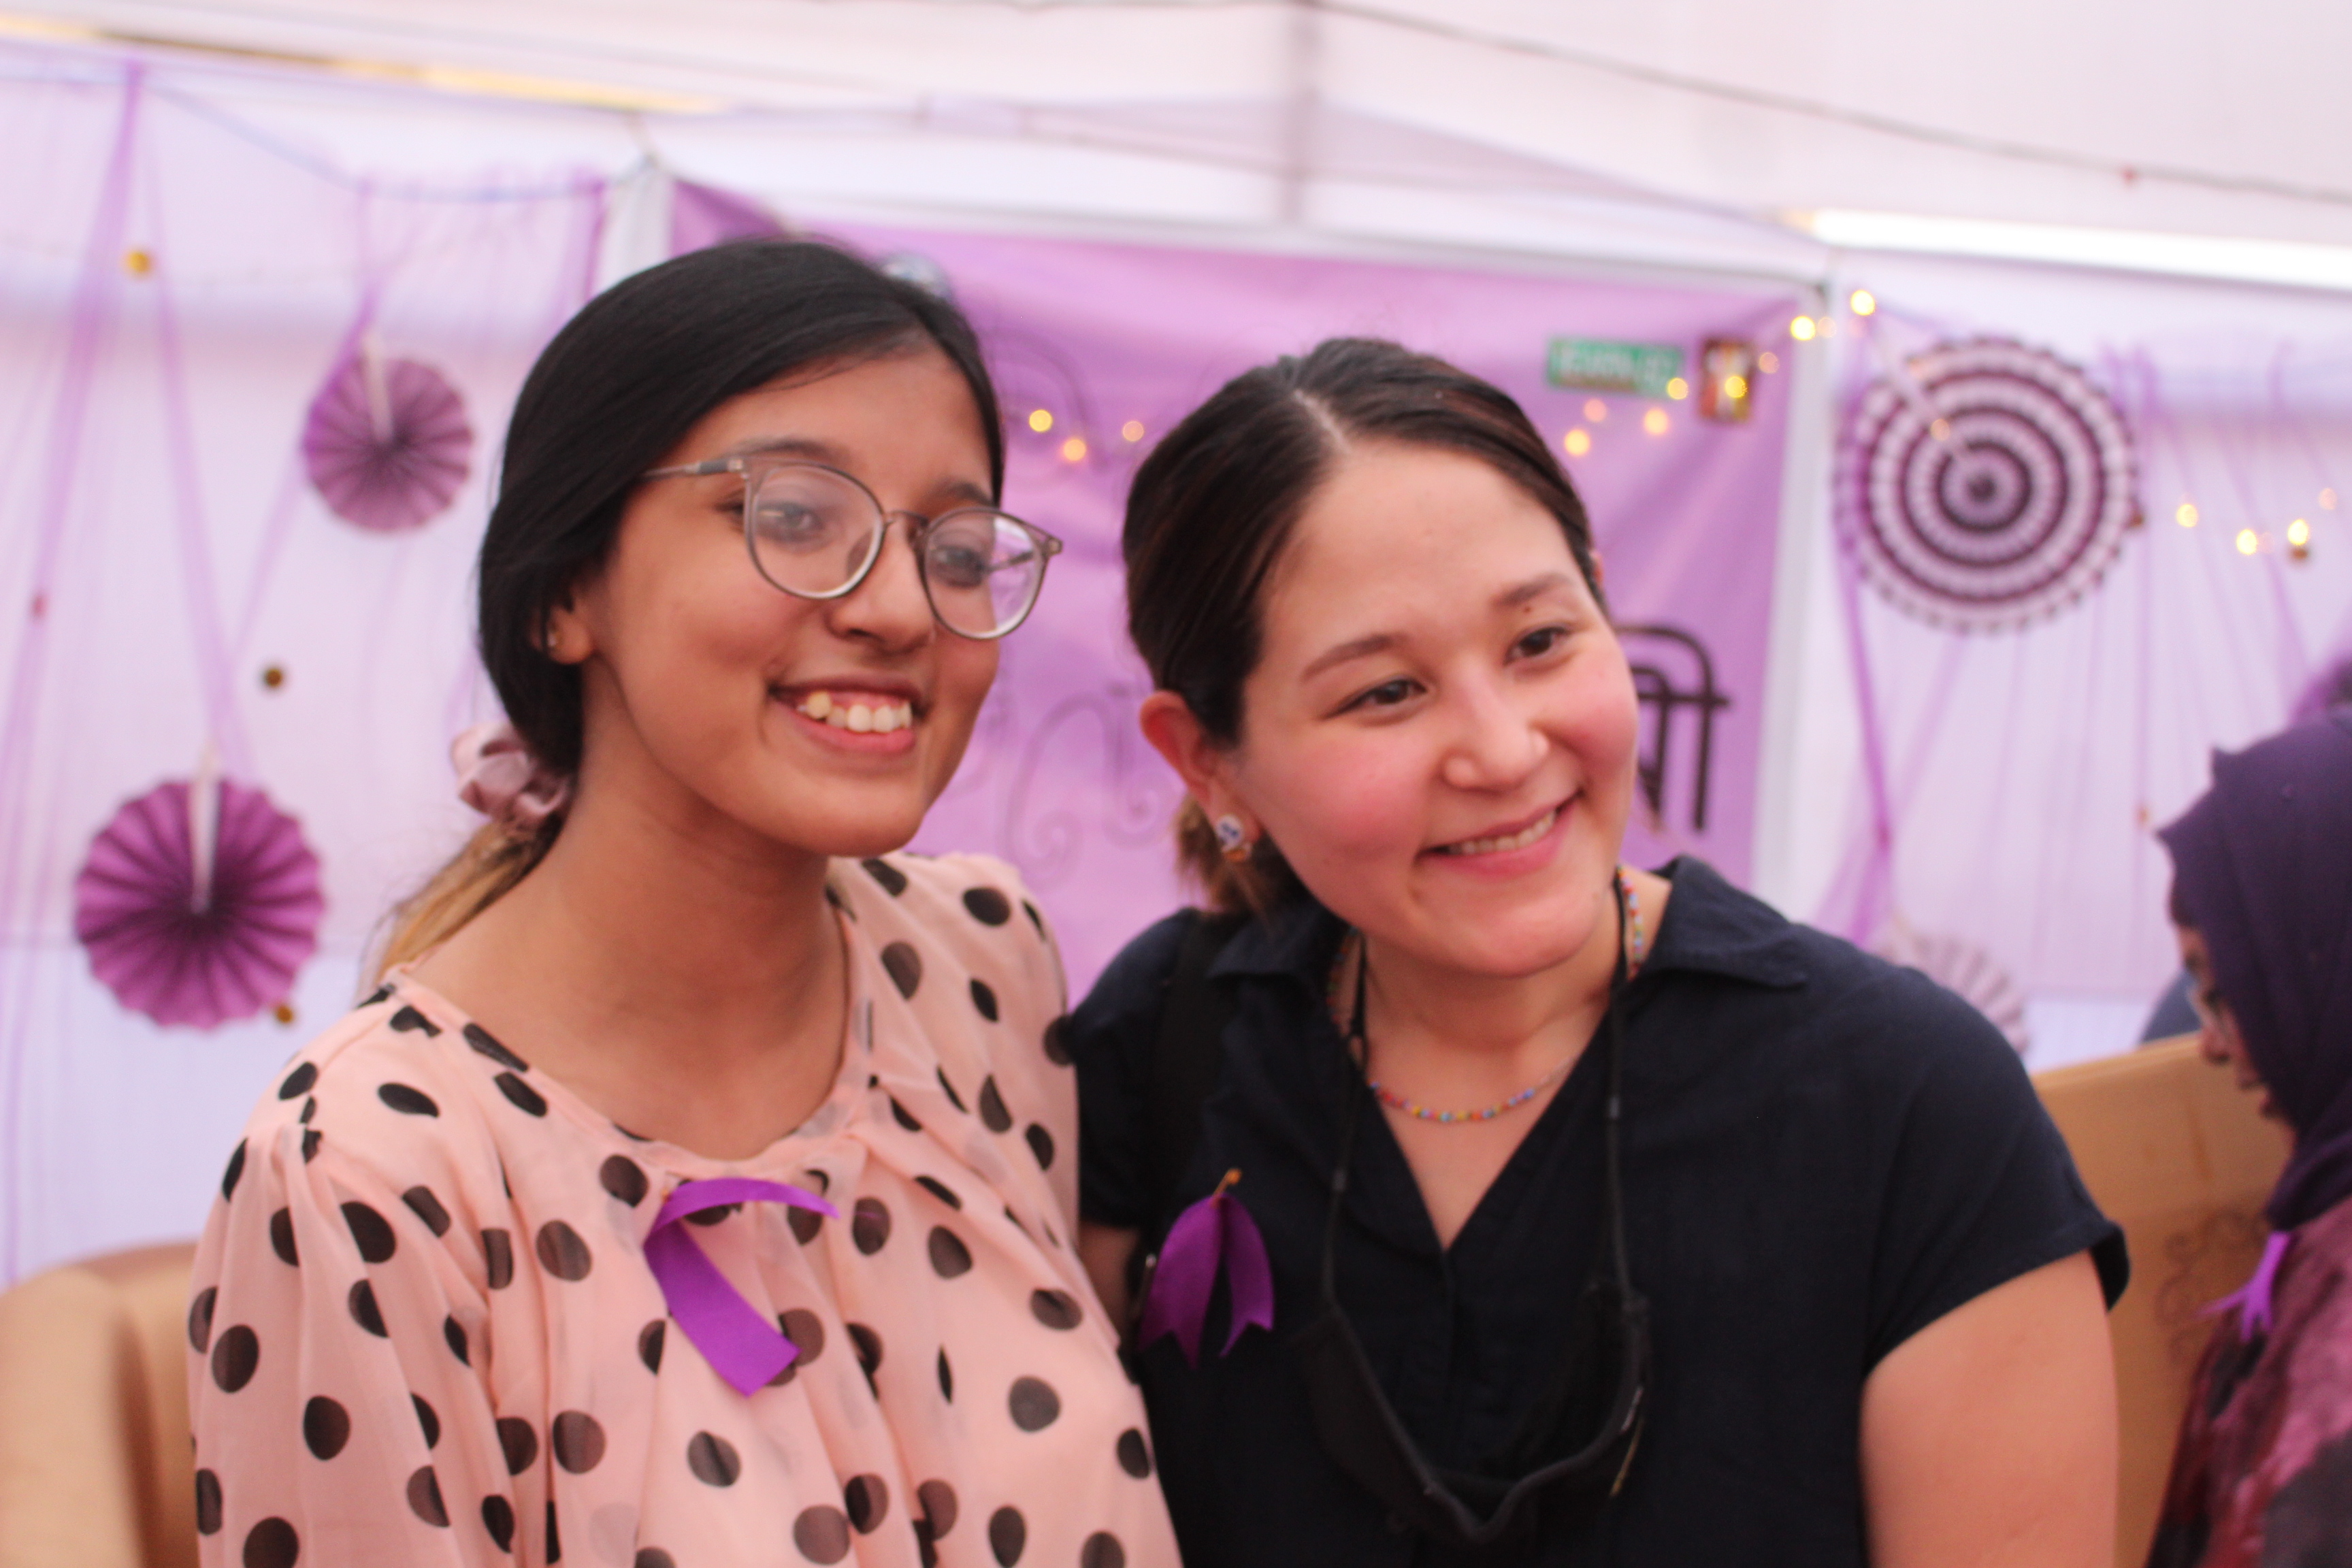 Nuzhat smiles during the event with anther woman